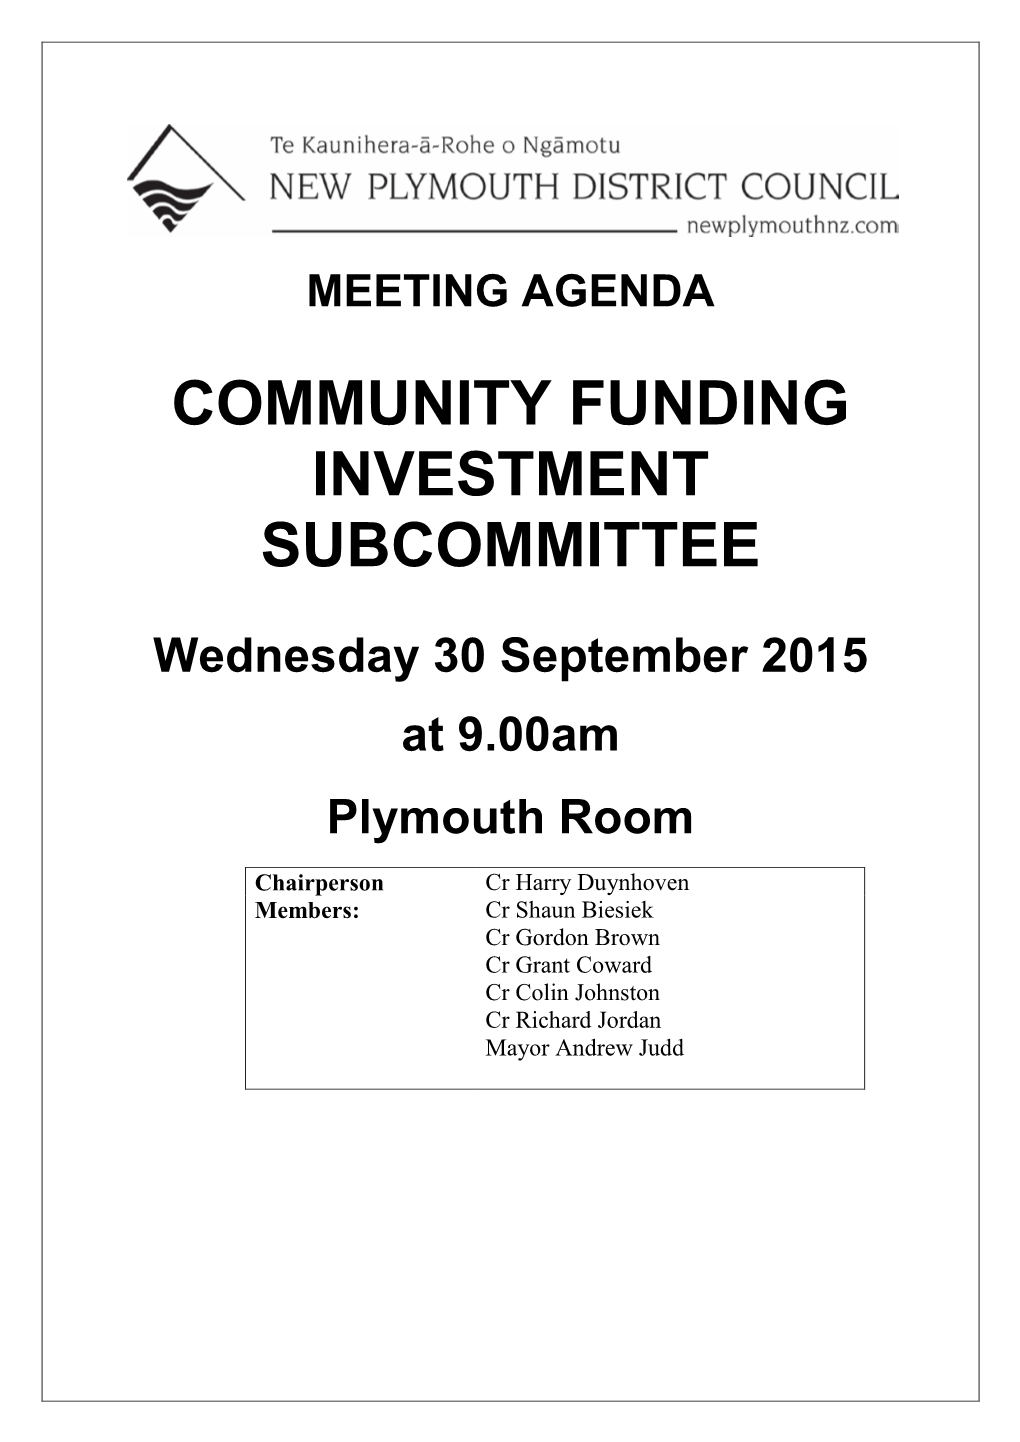 Community Funding Investment Subcommittee